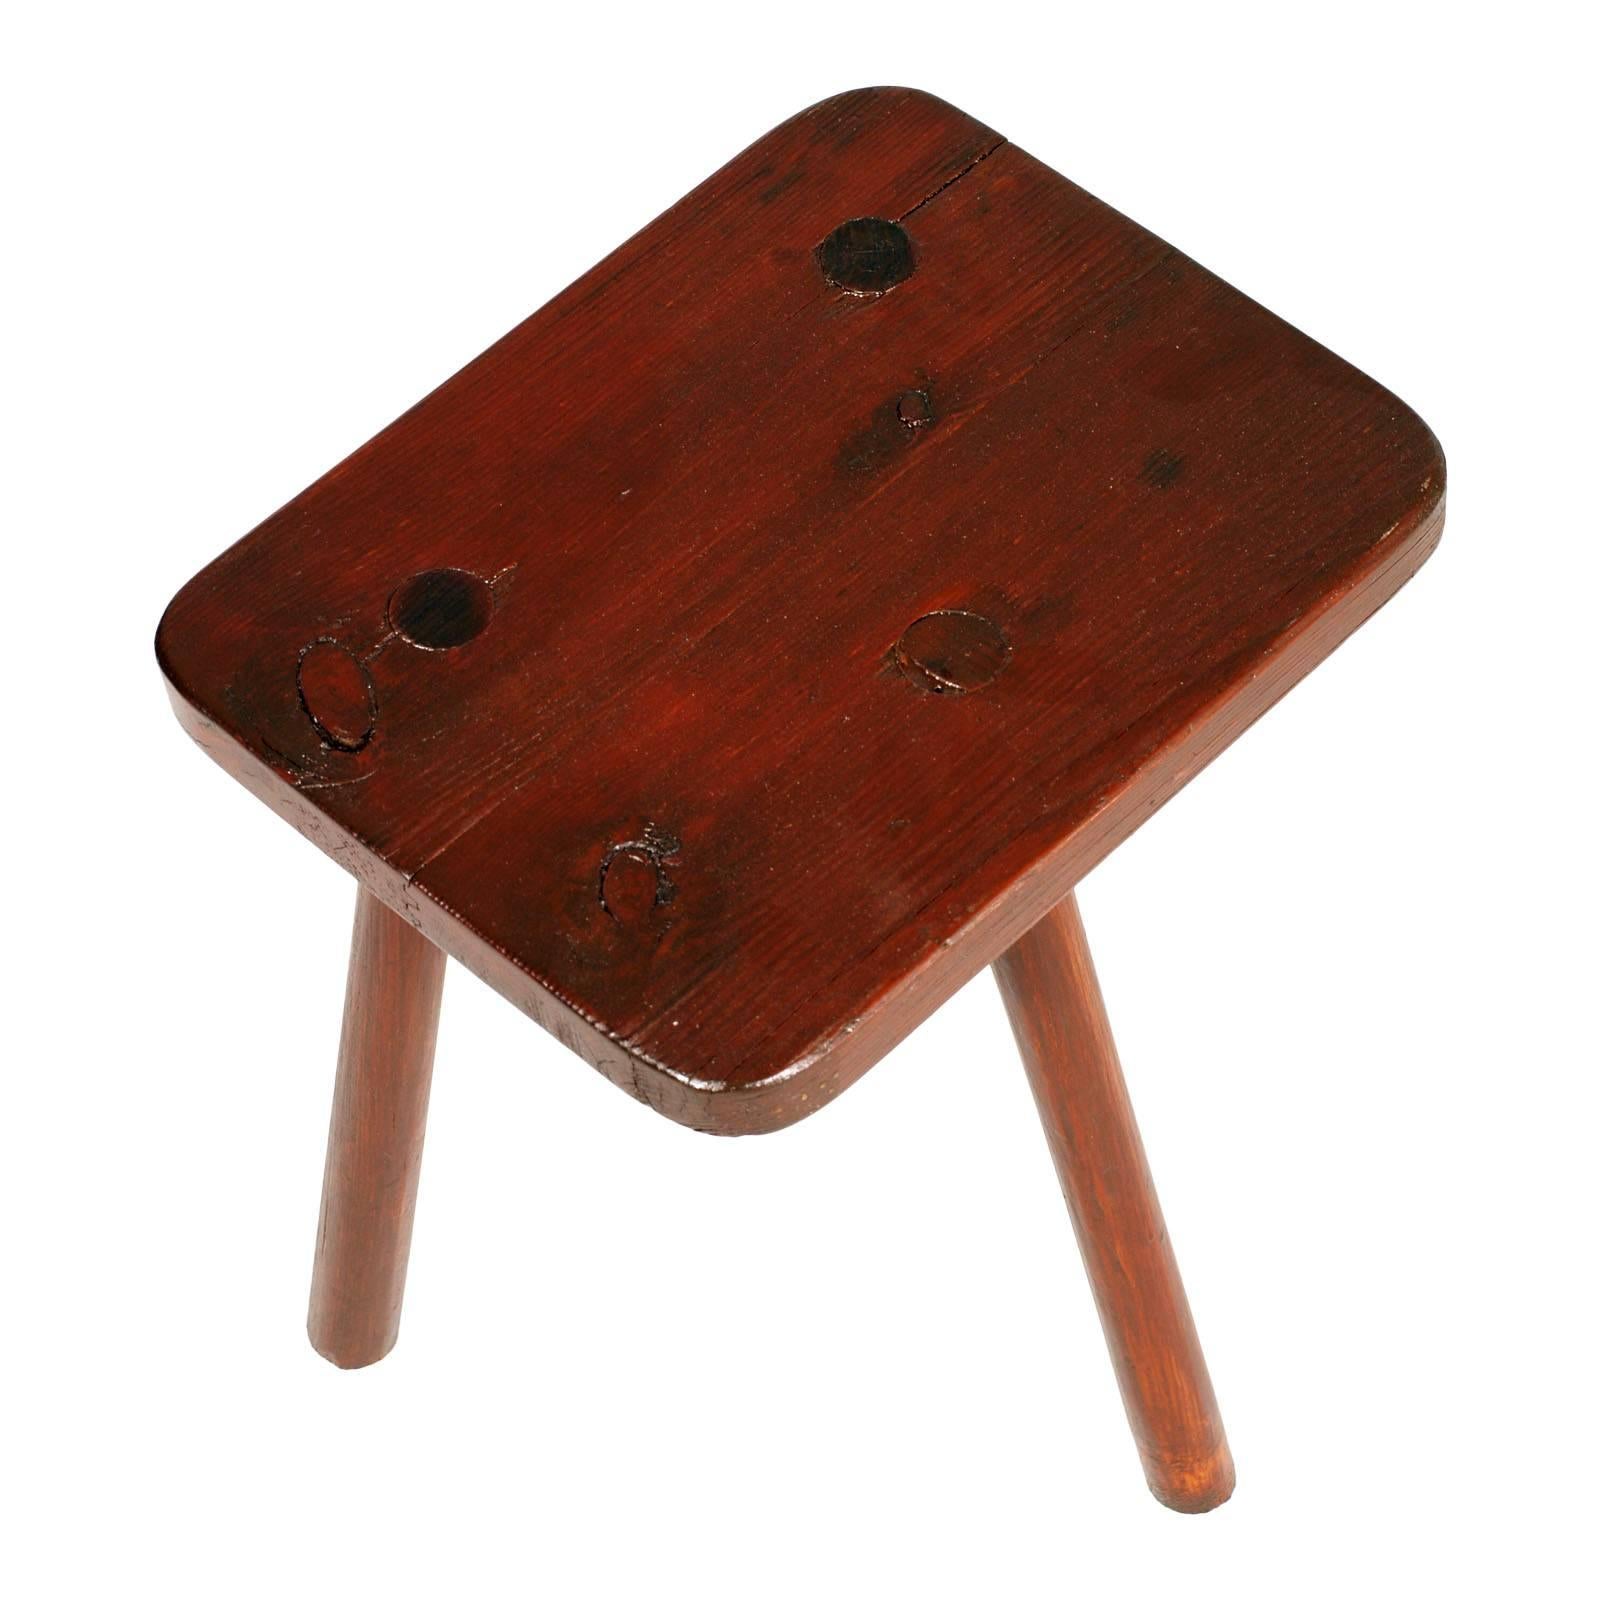 Tyrolean old country tripod stool milk cow in chestnut wood , restored, polished with wax
Measures cm: H 36 W 31 D 25.